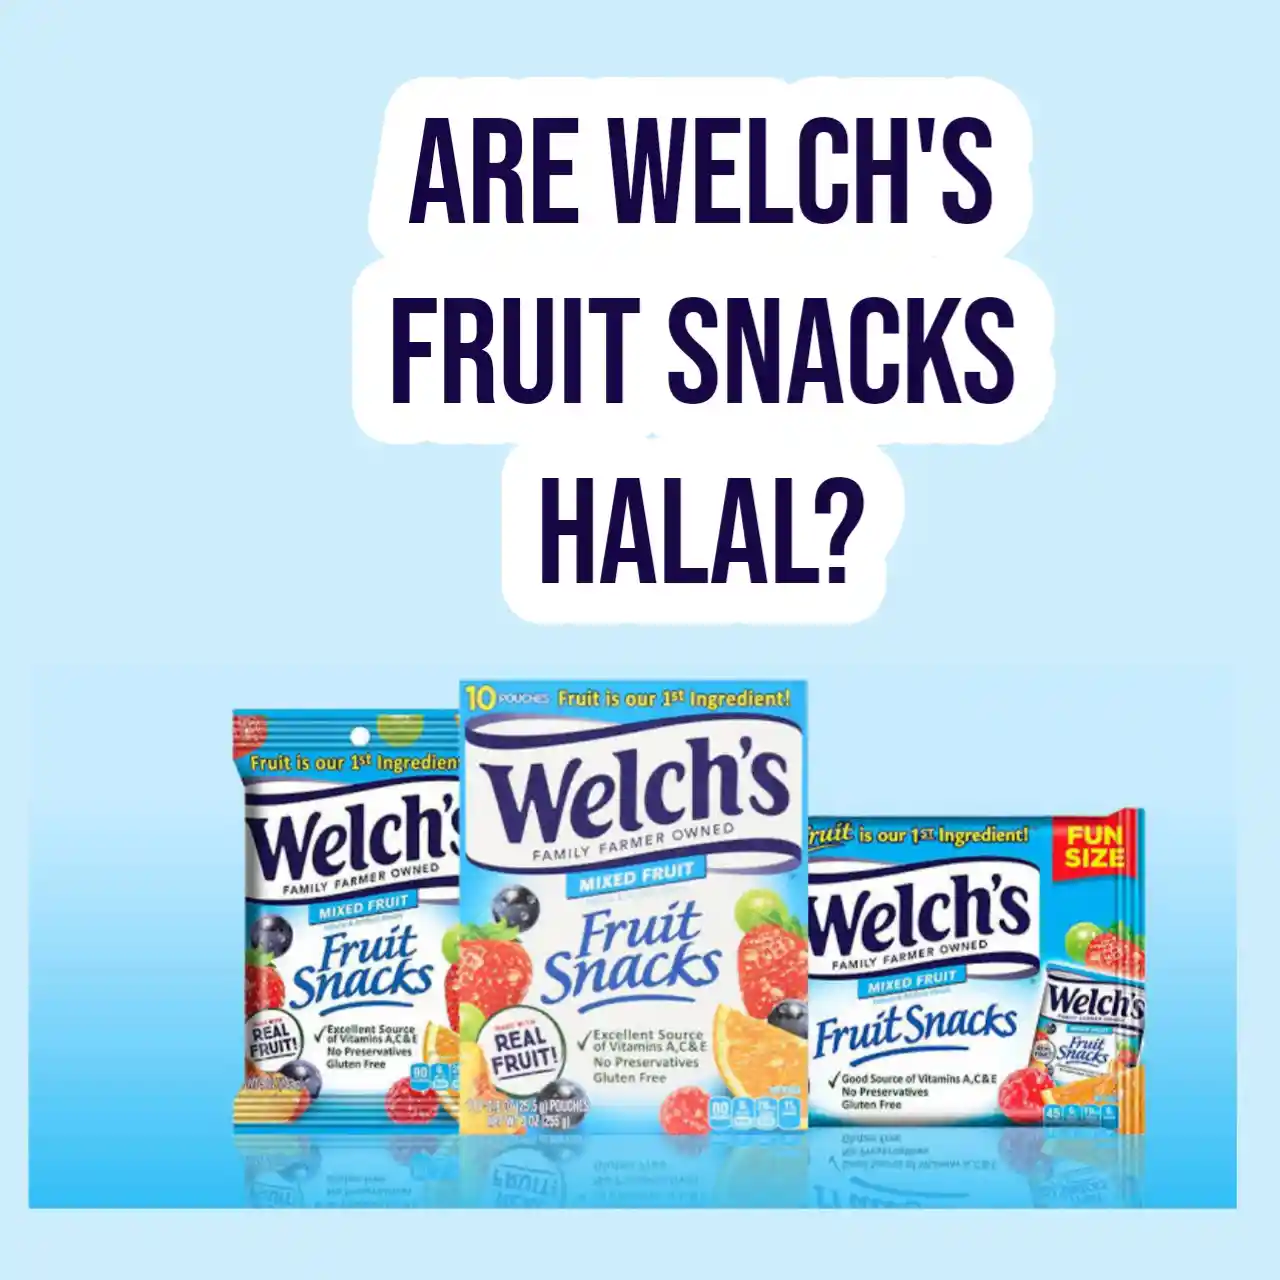 Are Welch's Fruit Snacks Halal